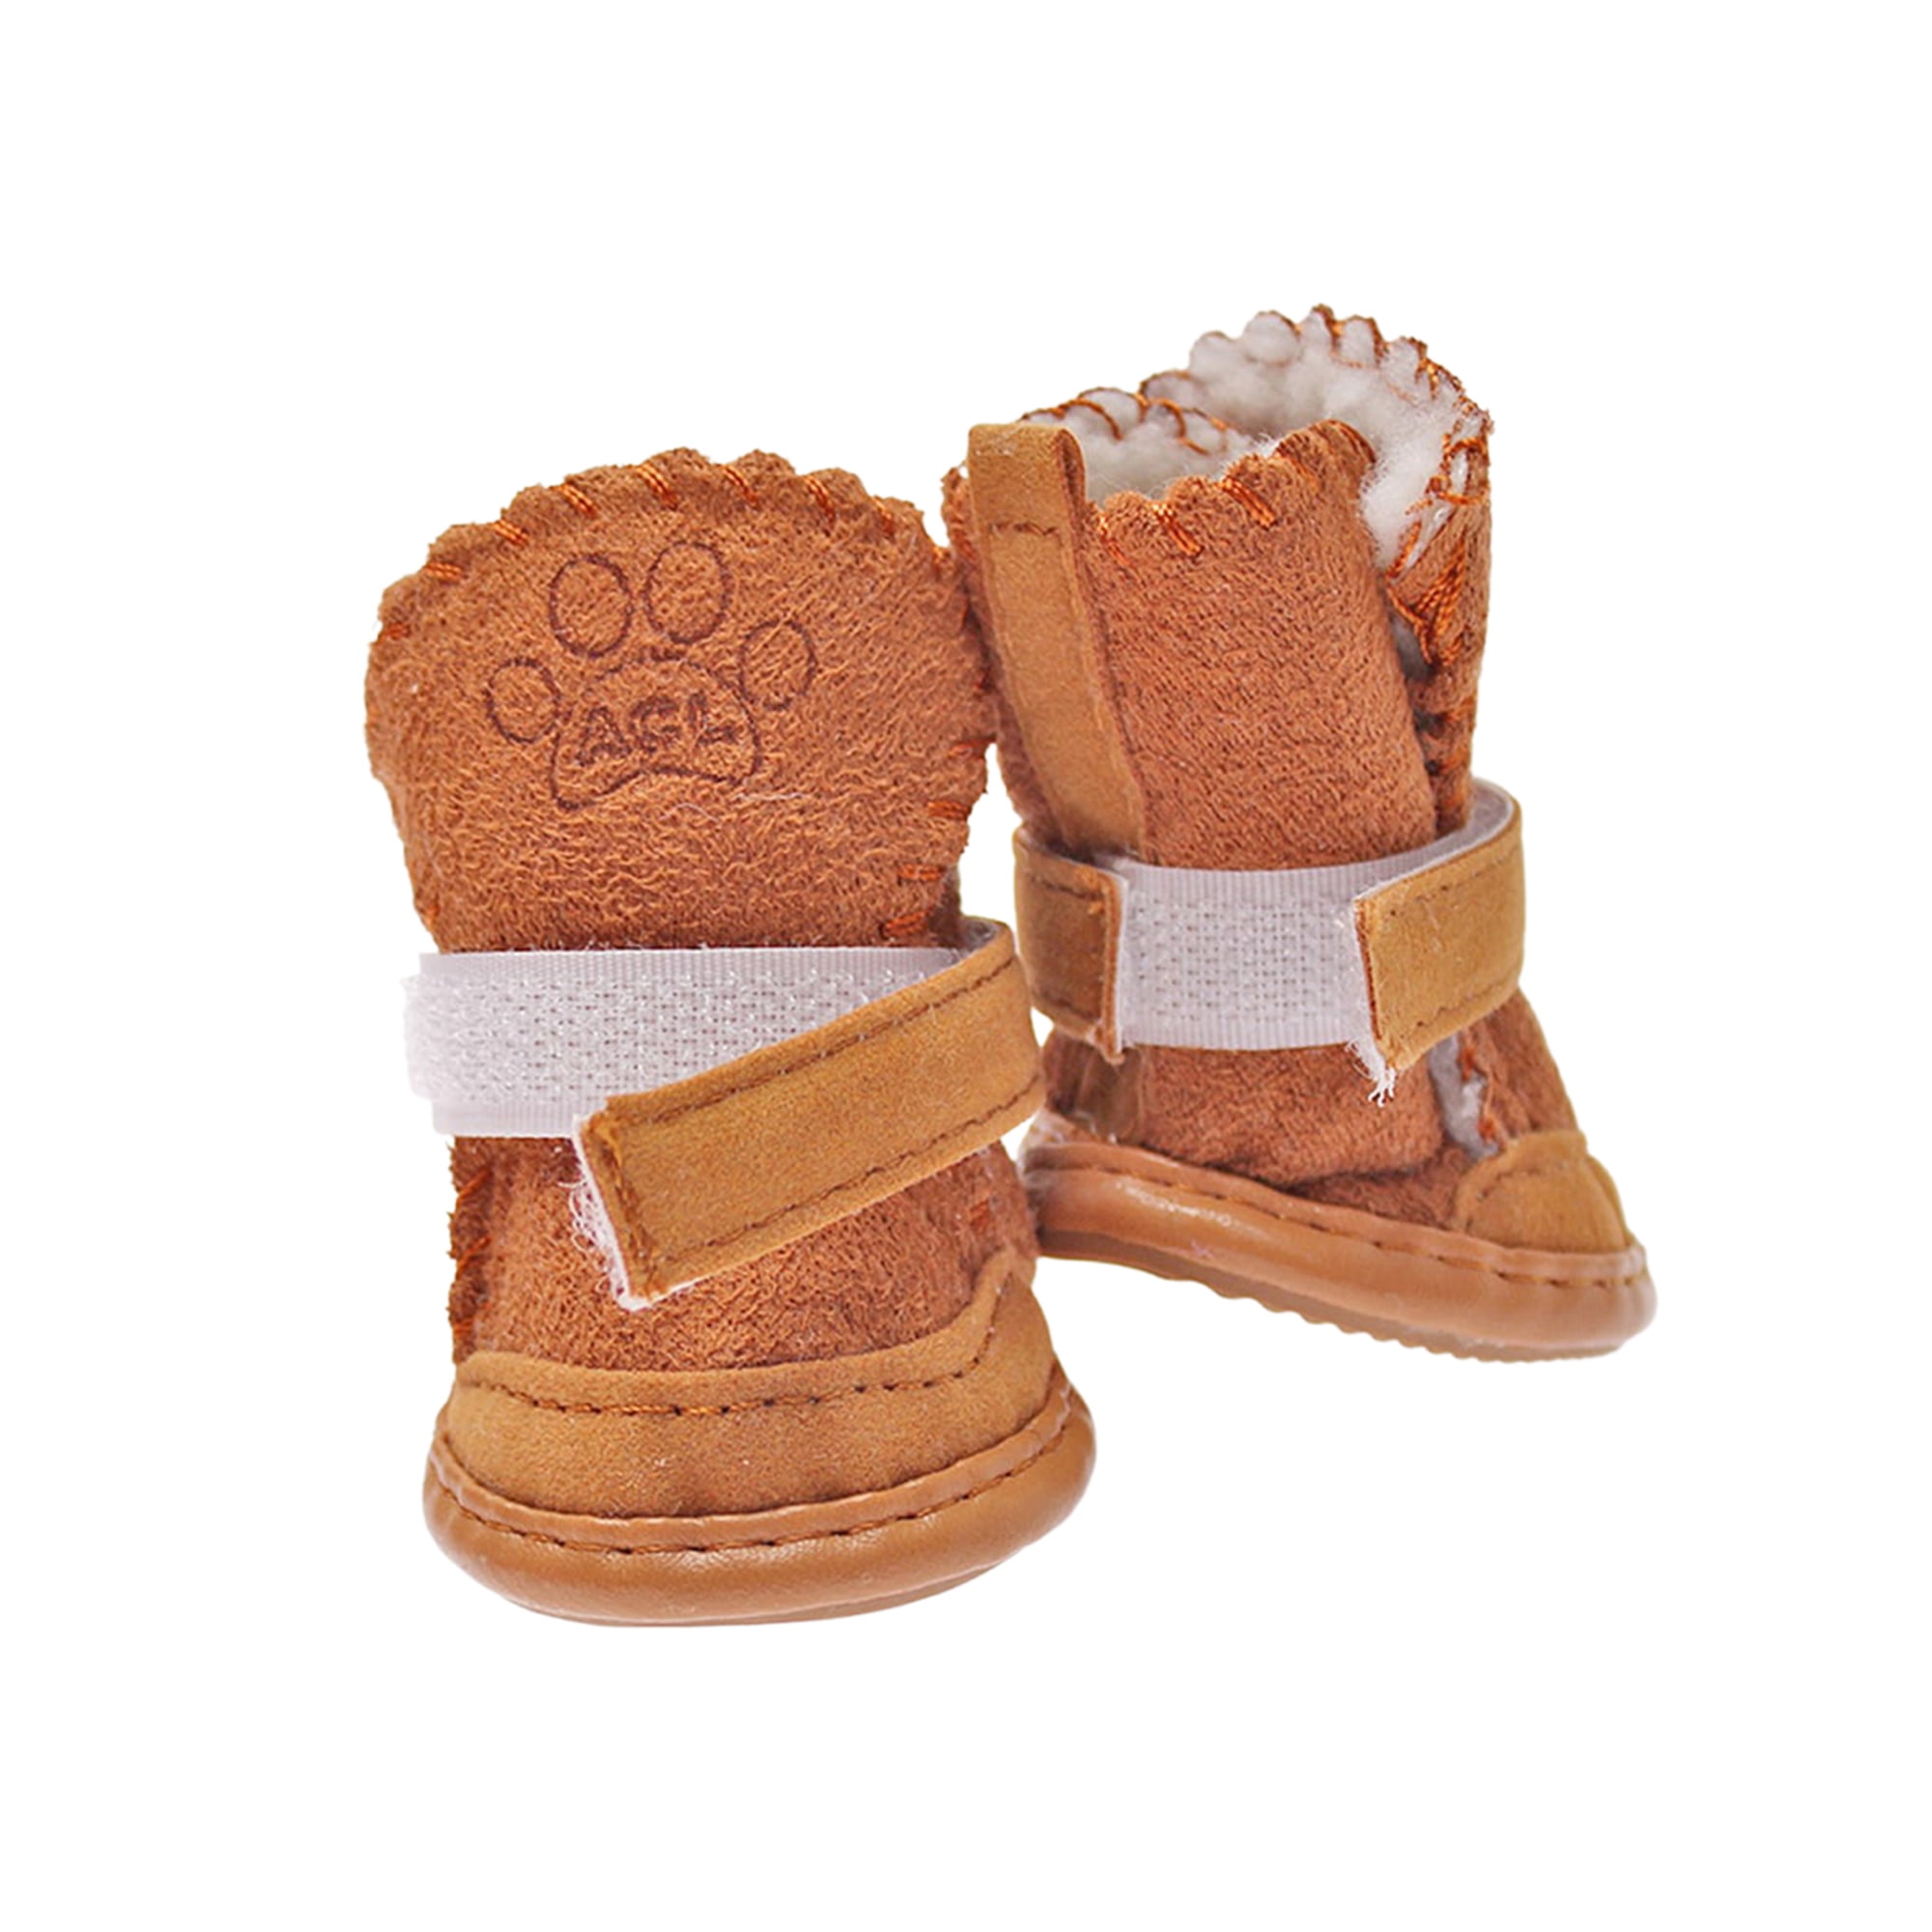 PawCare+ Dog Shoes: Non Slip Soft Sole Protector For Small & Medium Dogs.  Adjustable Straps, Perfect For Daily Walking. From Aieland, $8.04